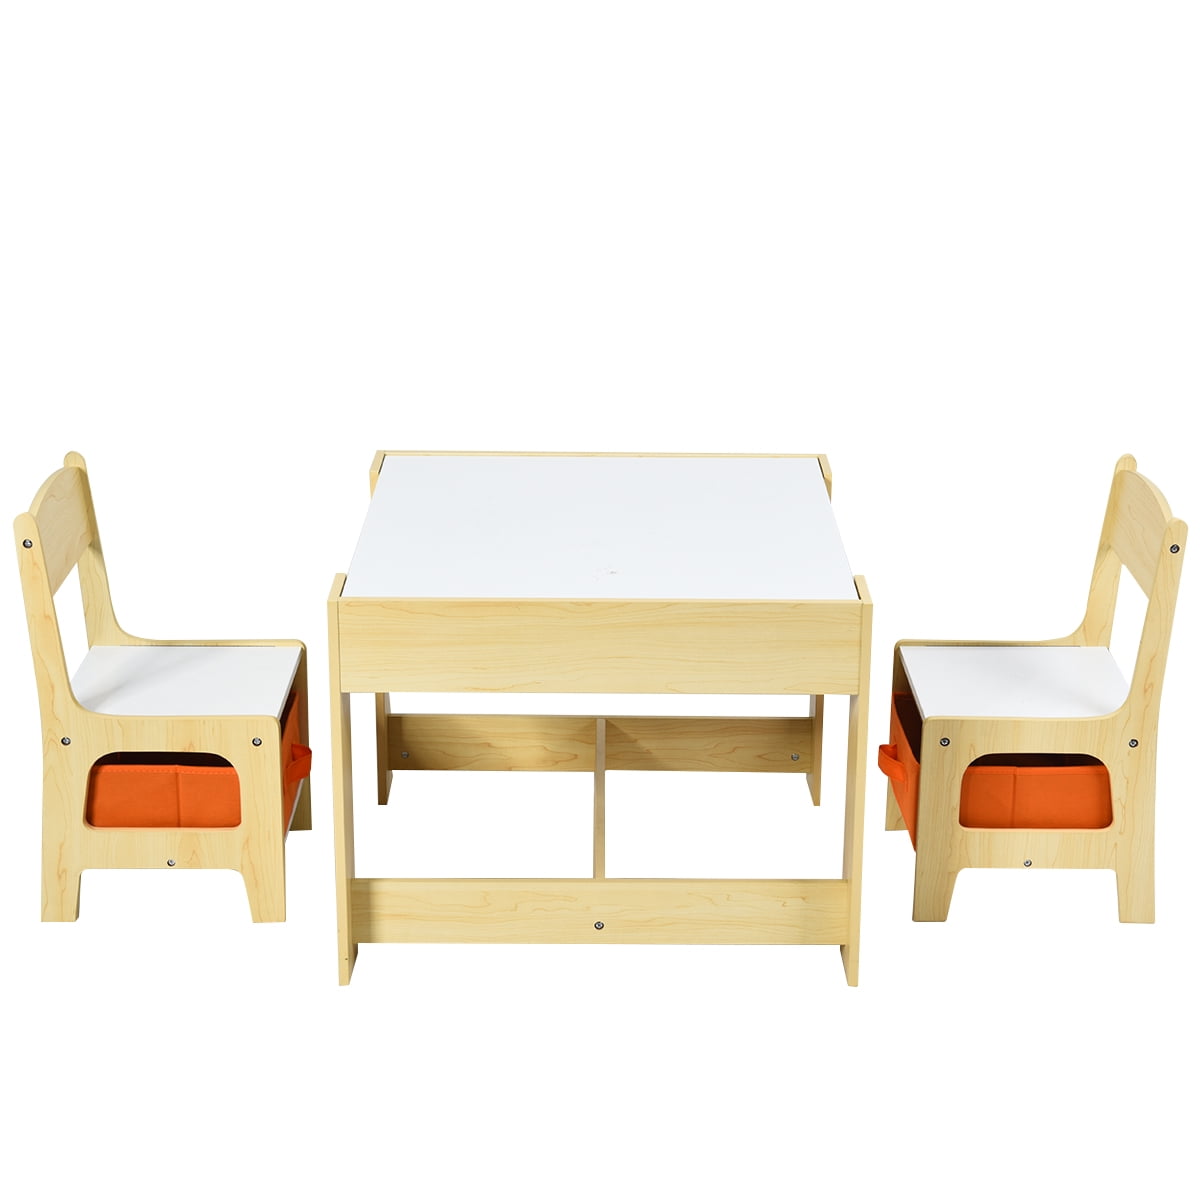 Costway 2-Piece White Rectangular Wood Top Kids Desk and Chair Set Bar  Table Set Study Writing Desk with Hutch Bookshelves HY10013WH - The Home  Depot